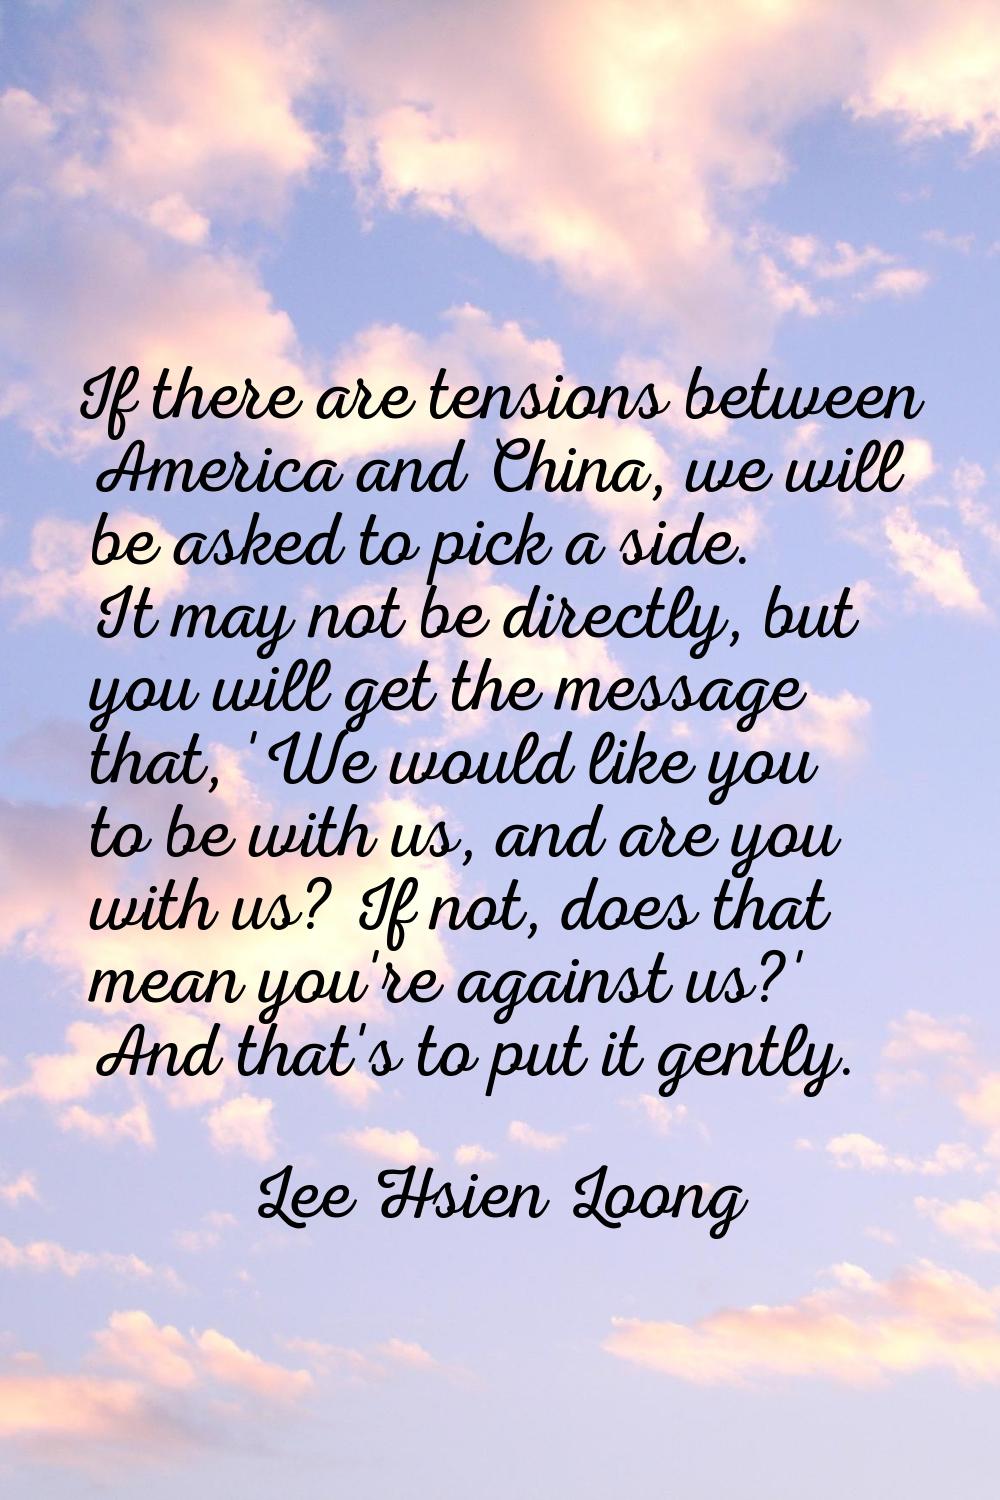 If there are tensions between America and China, we will be asked to pick a side. It may not be dir